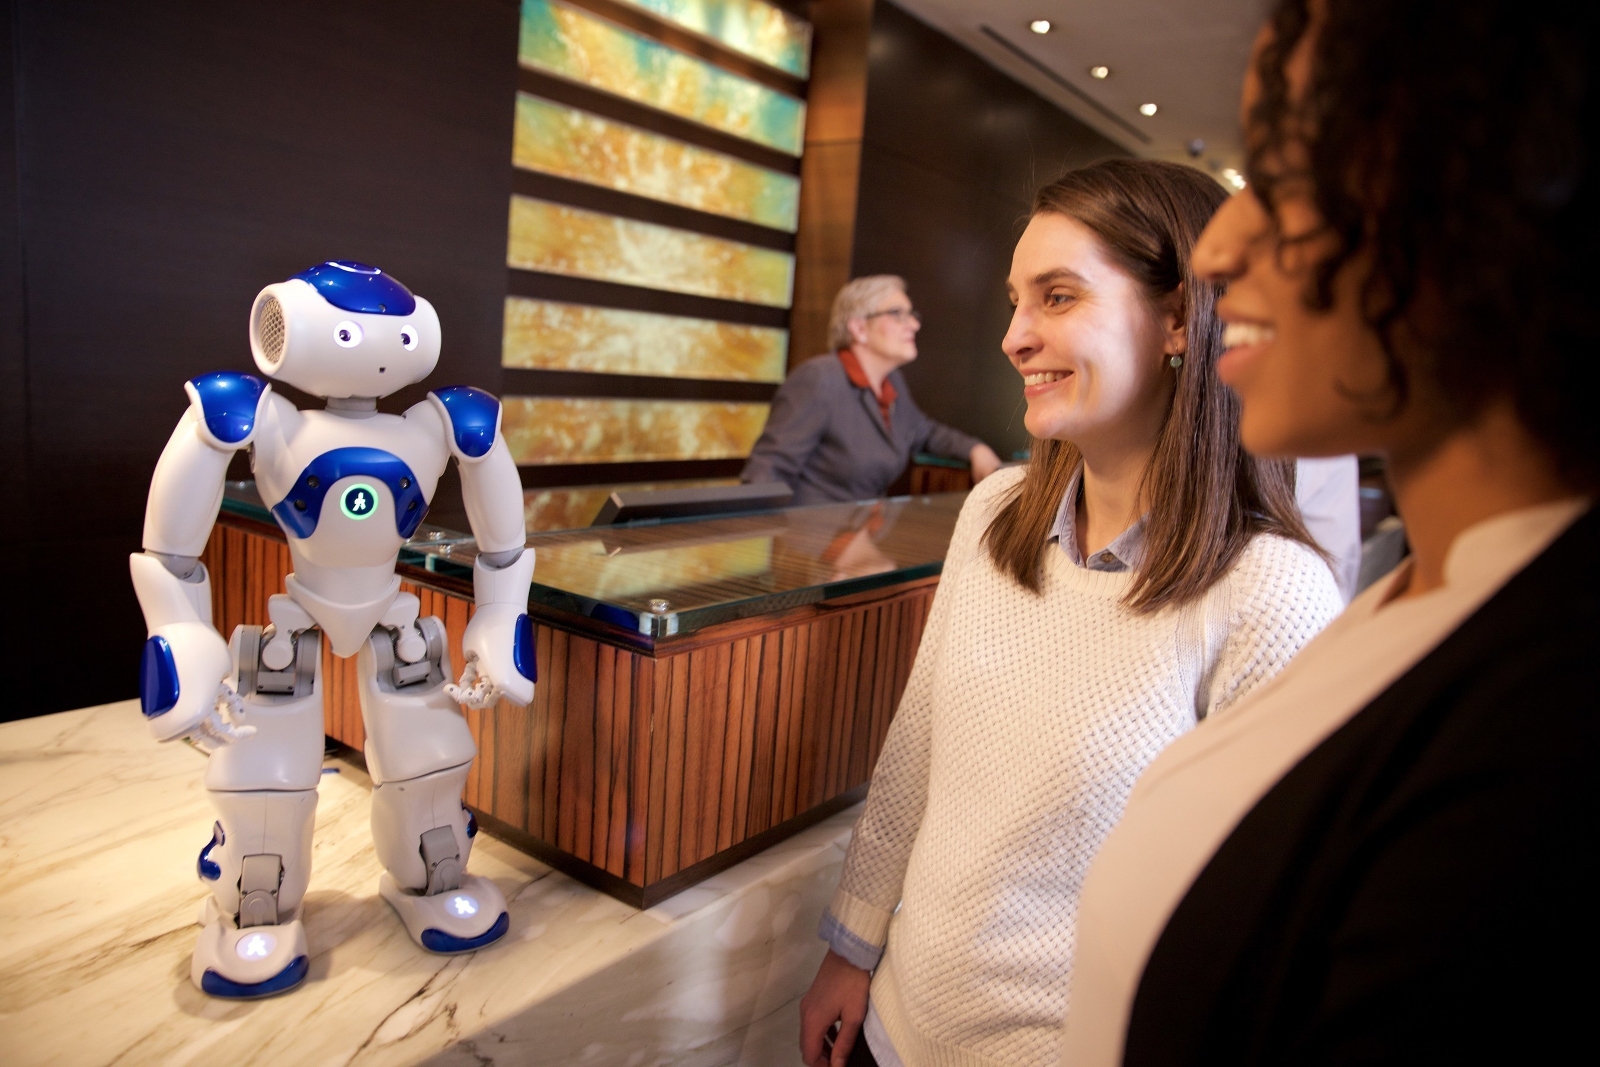 connie-the-robot-photo-courtesy-of-green-buzz-agency-feature-photo-service-for-ibm.jpg